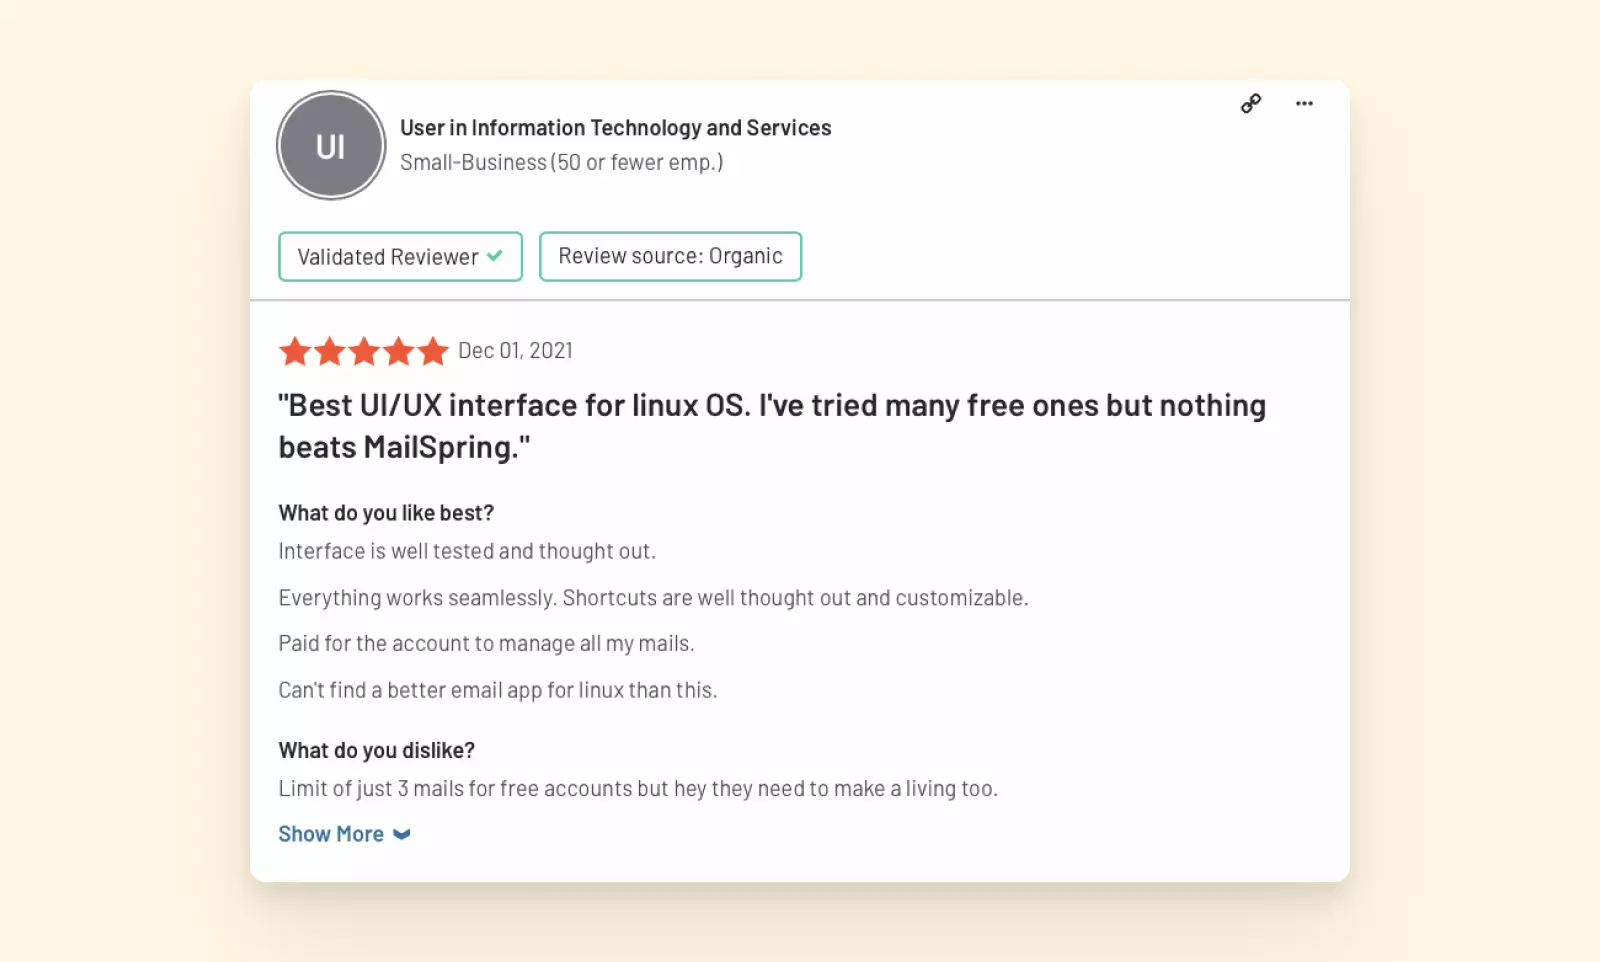 Positive review of Mailspring